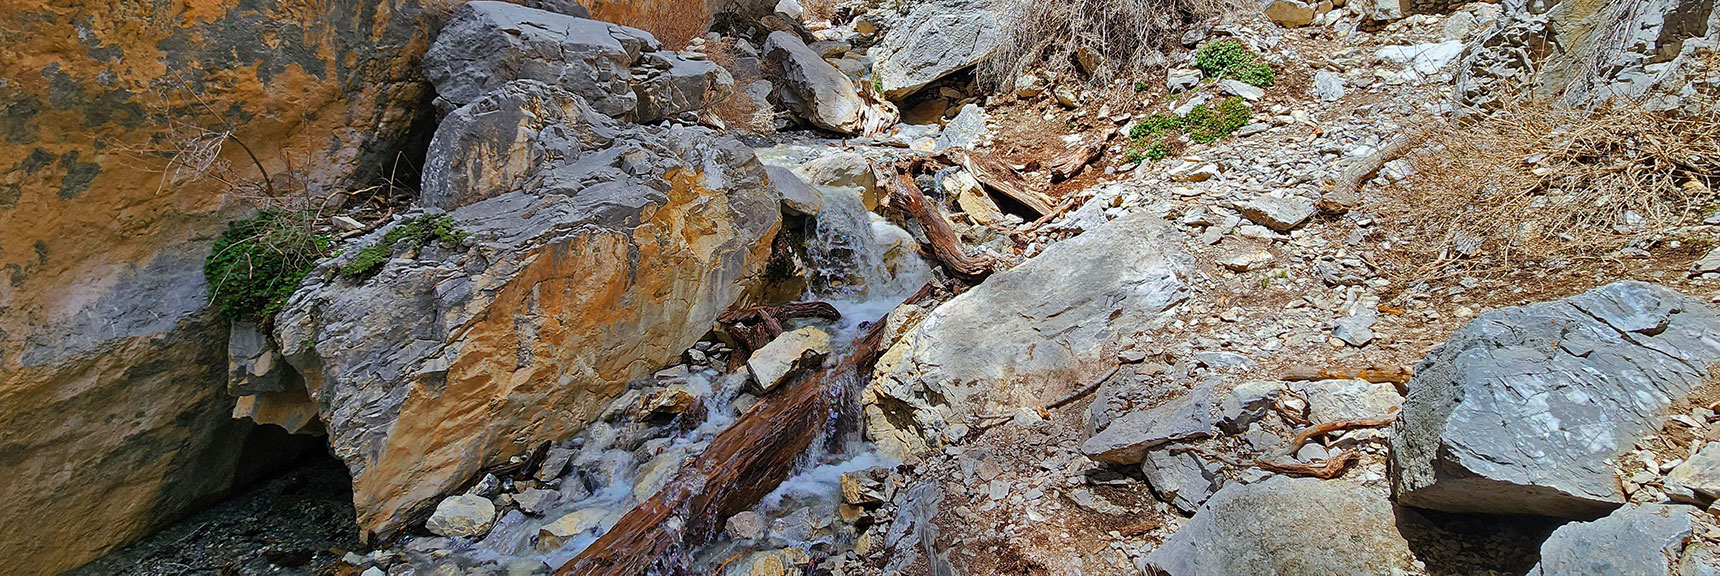 Spring Runoff Flowing Strongly in Early May After a Heavy Snow Winter | Fletcher Canyon Trail | Mt Charleston Wilderness, Nevada